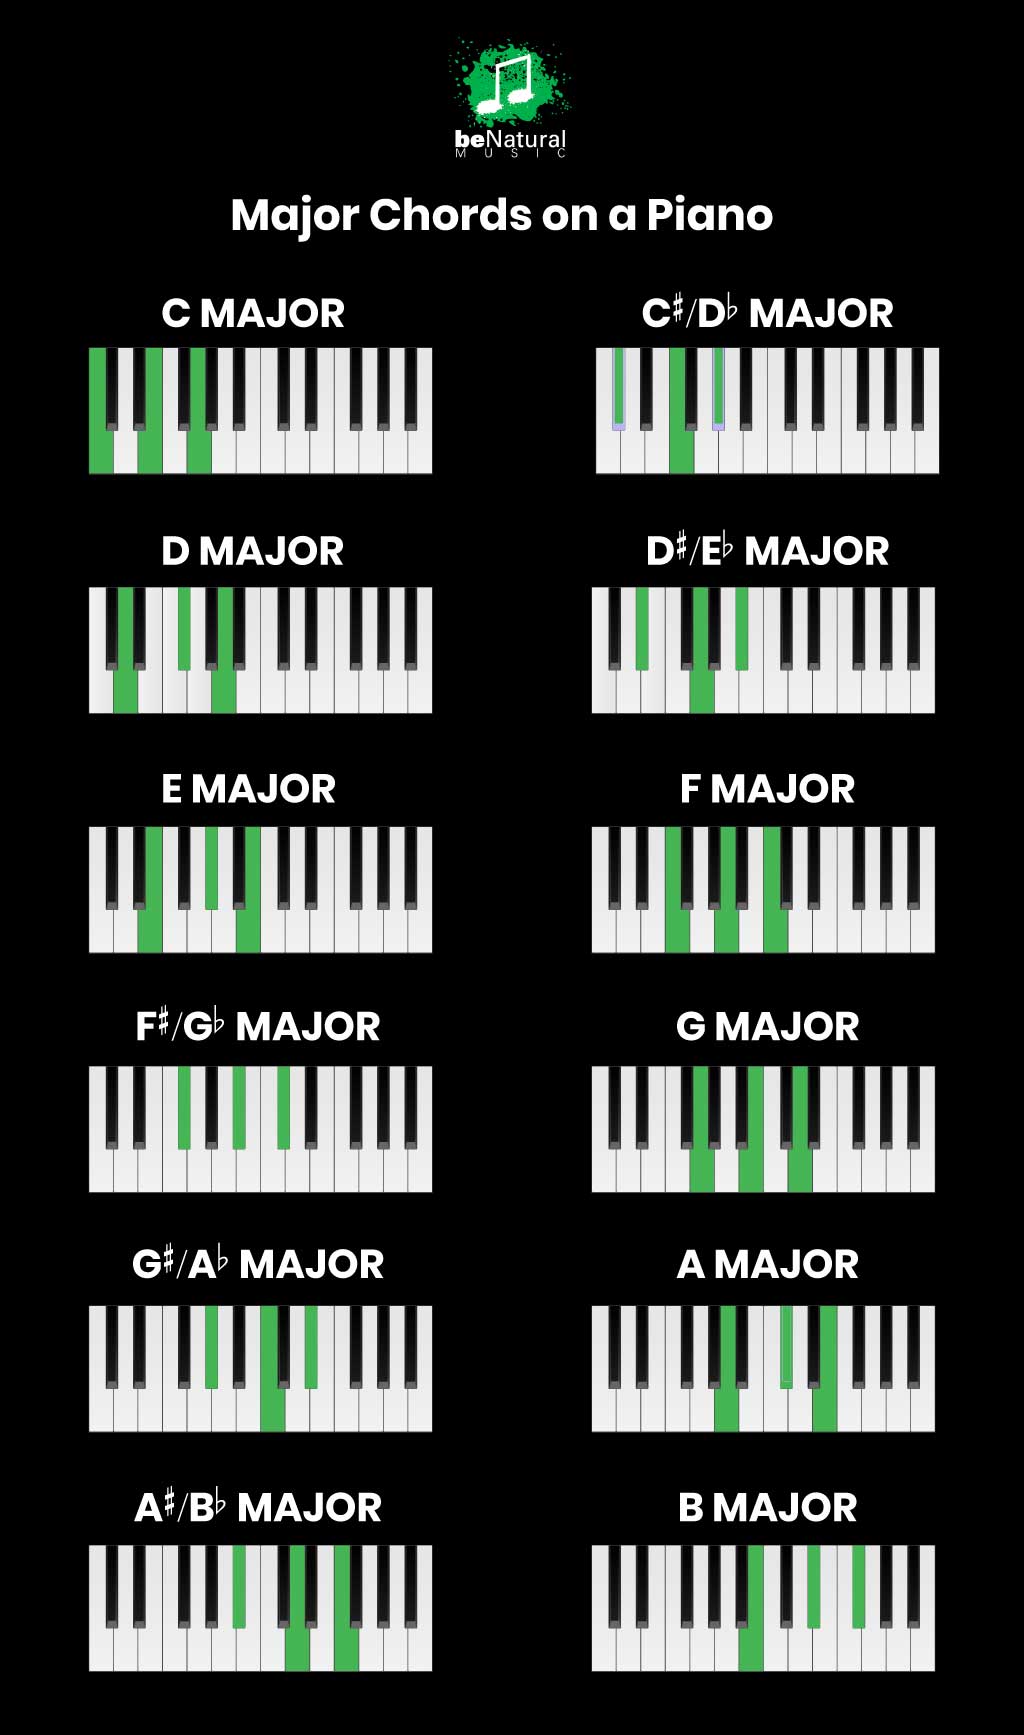 Major chords on a piano